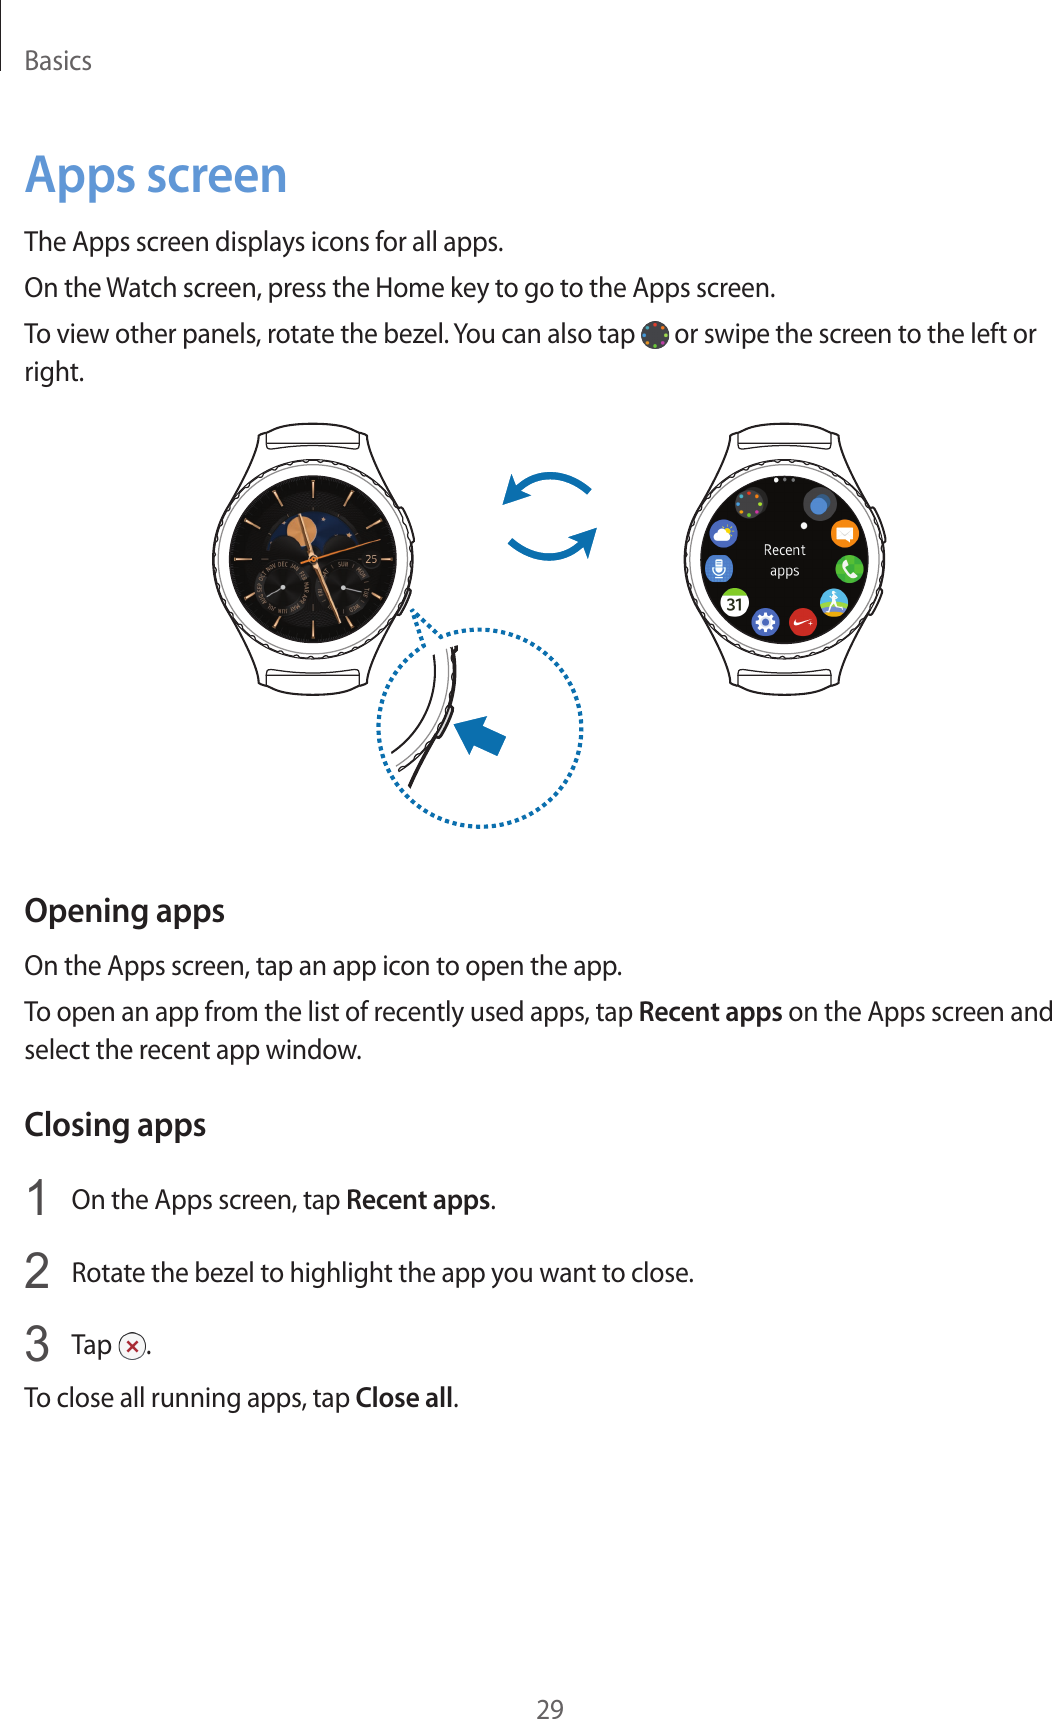 Basics29Apps screenThe Apps screen displays icons for all apps.On the Watch screen, press the Home key to go to the Apps screen.To view other panels, rotate the bezel. You can also tap   or swipe the screen to the left or right.Opening appsOn the Apps screen, tap an app icon to open the app.To open an app from the list of recently used apps, tap Recent apps on the Apps screen and select the recent app window.Closing apps1  On the Apps screen, tap Recent apps.2  Rotate the bezel to highlight the app you want to close.3  Tap  .To close all running apps, tap Close all.